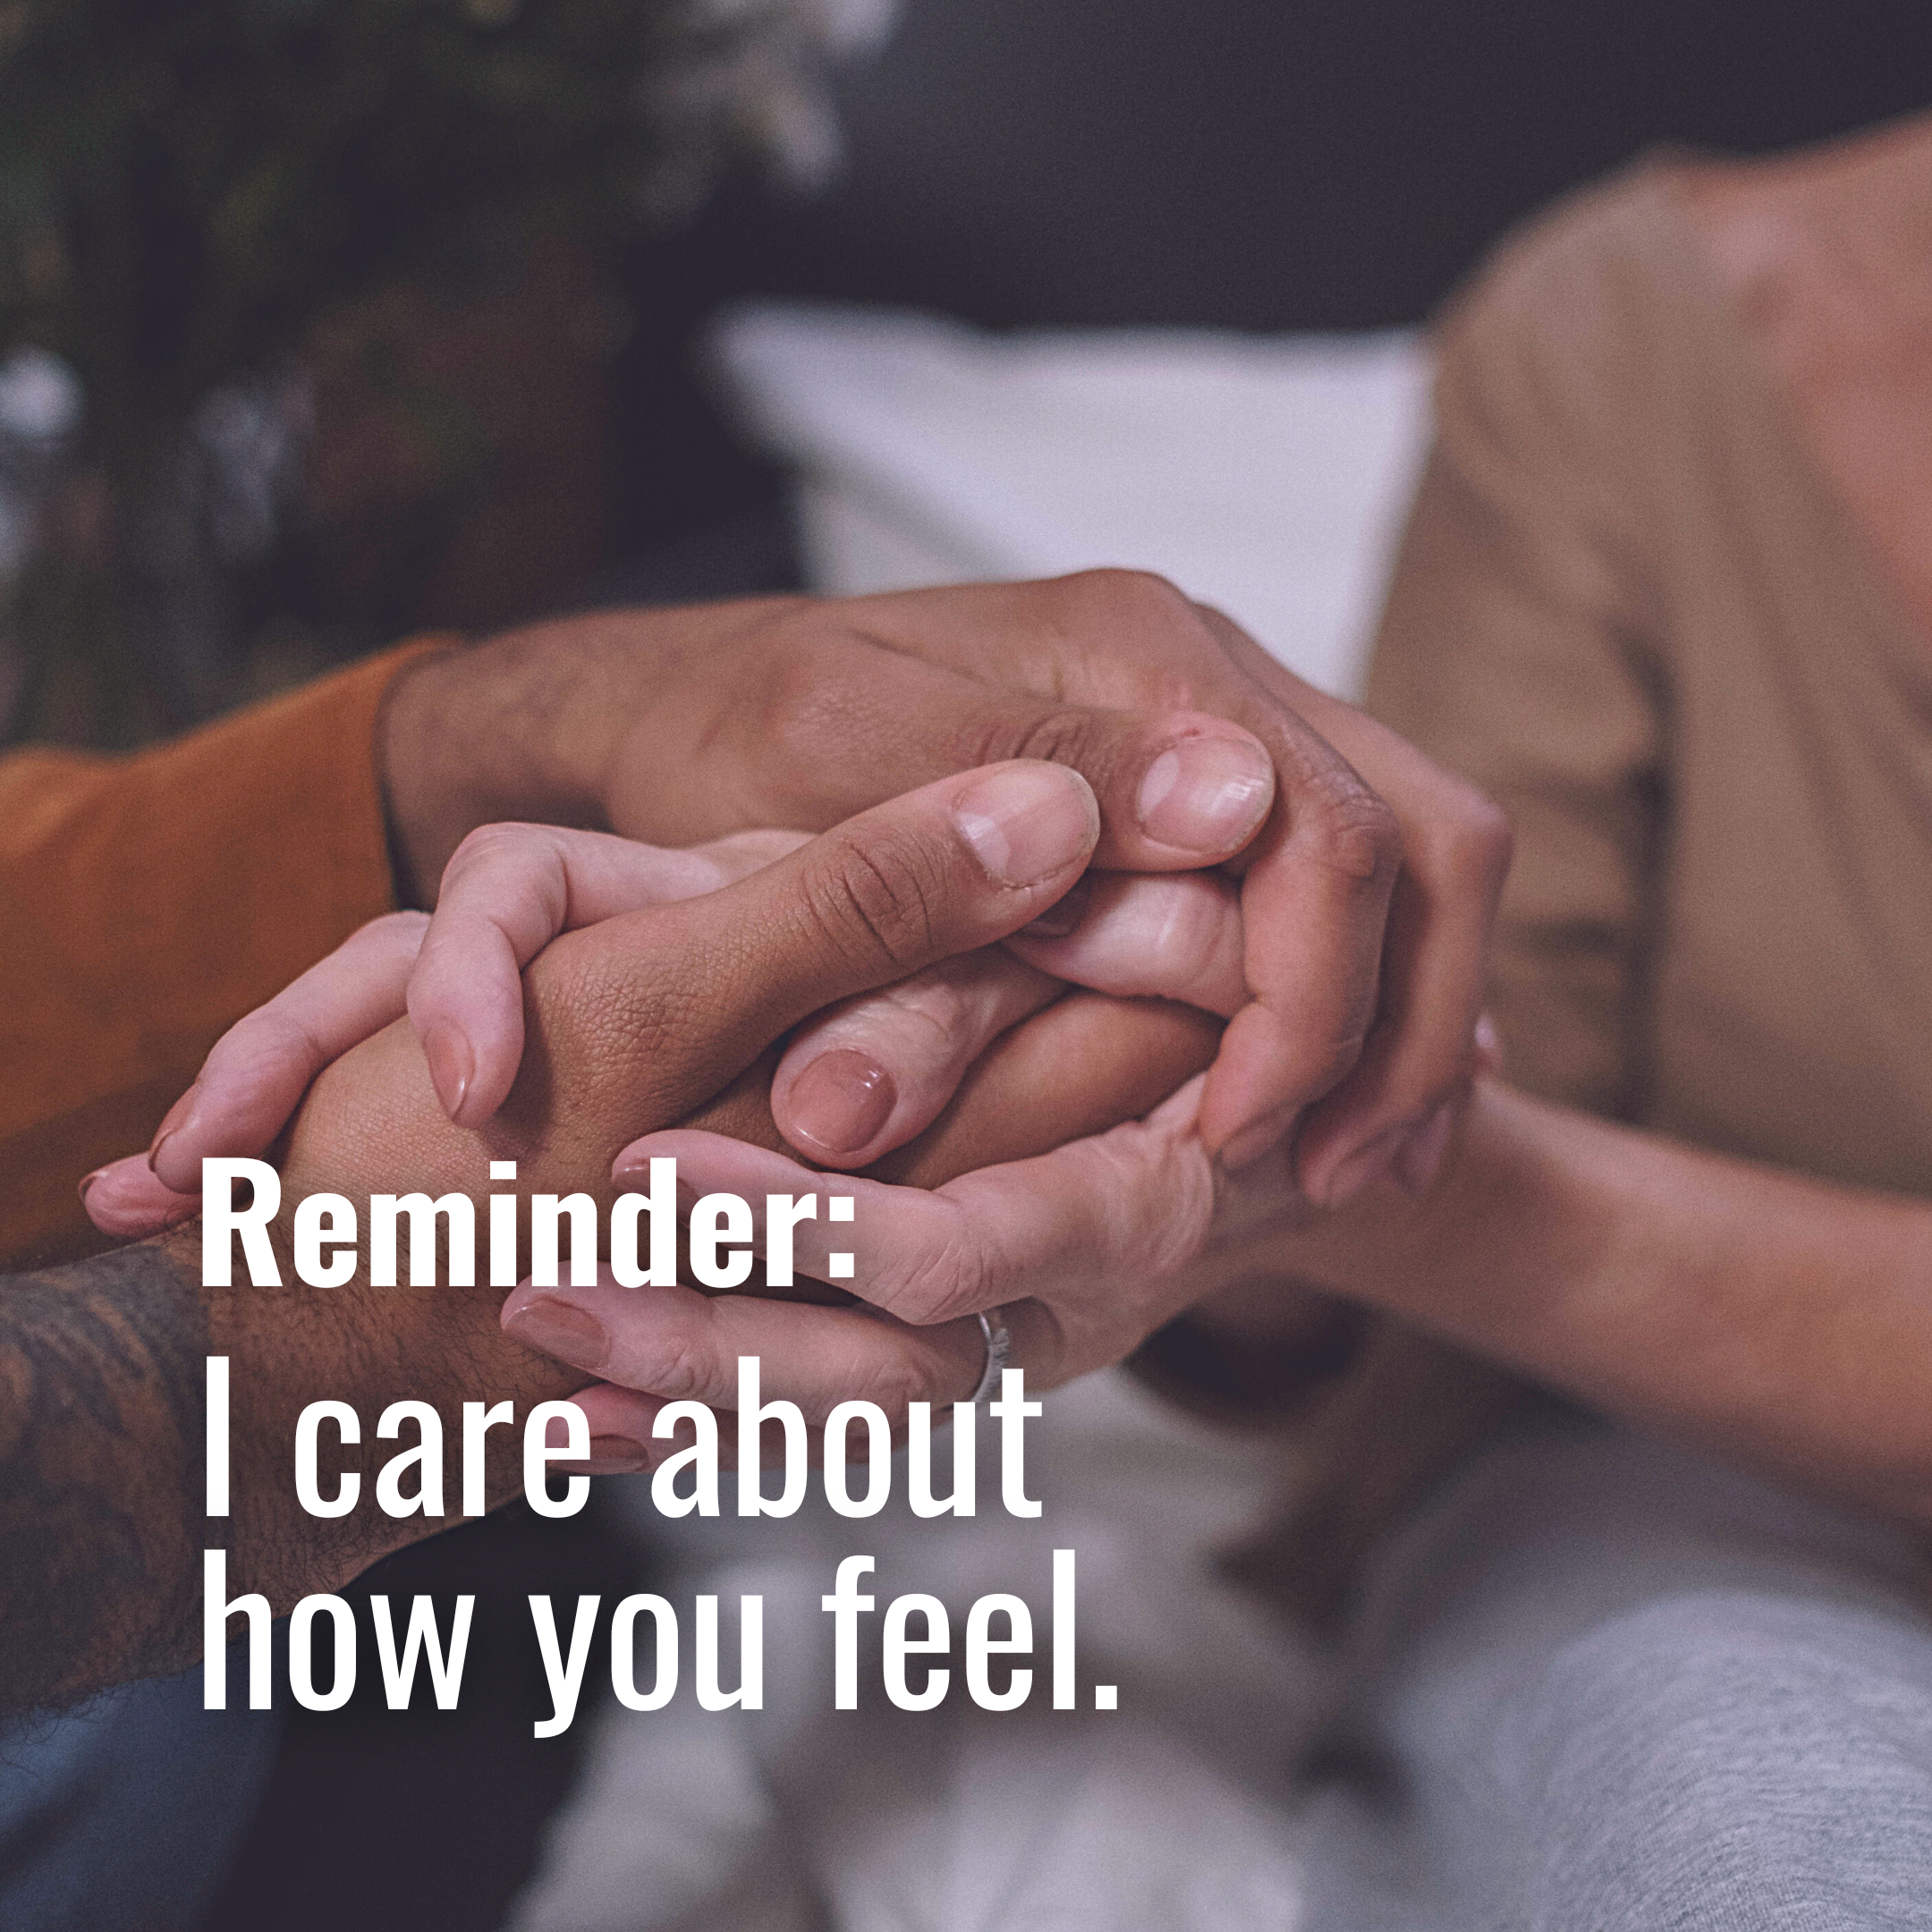 I care about how you feel.